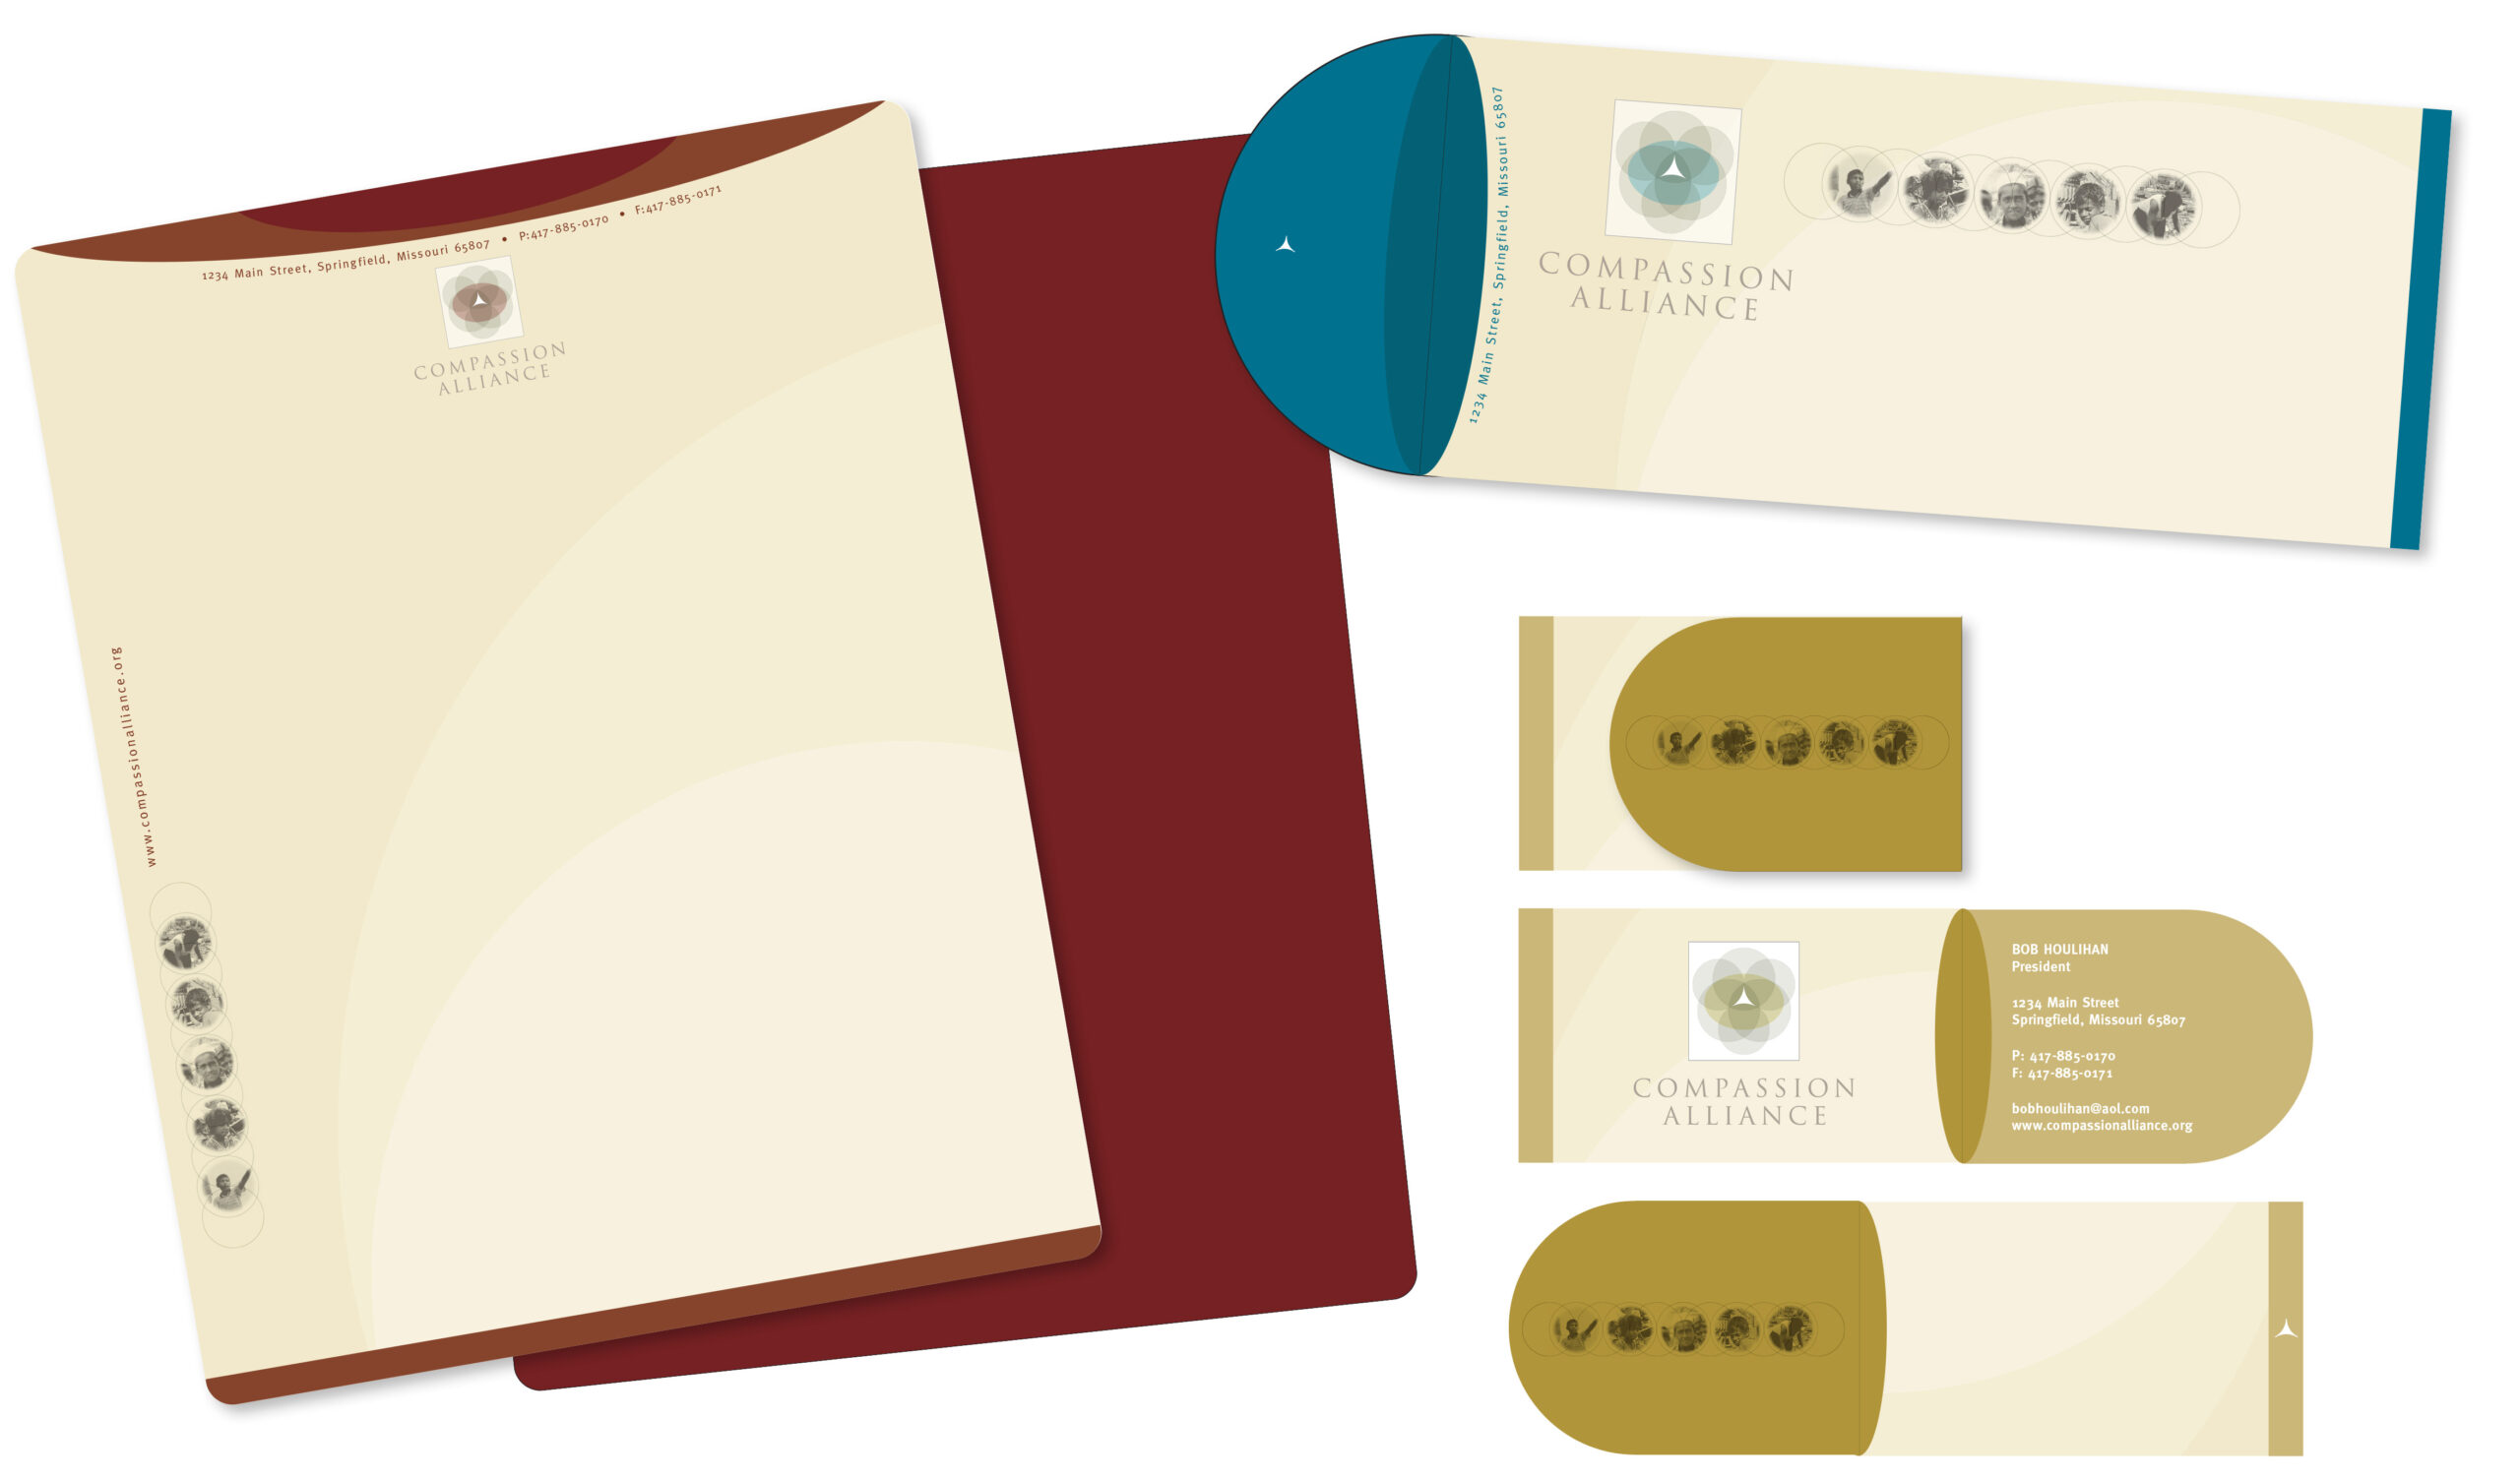 Compassion Alliance stationery pack